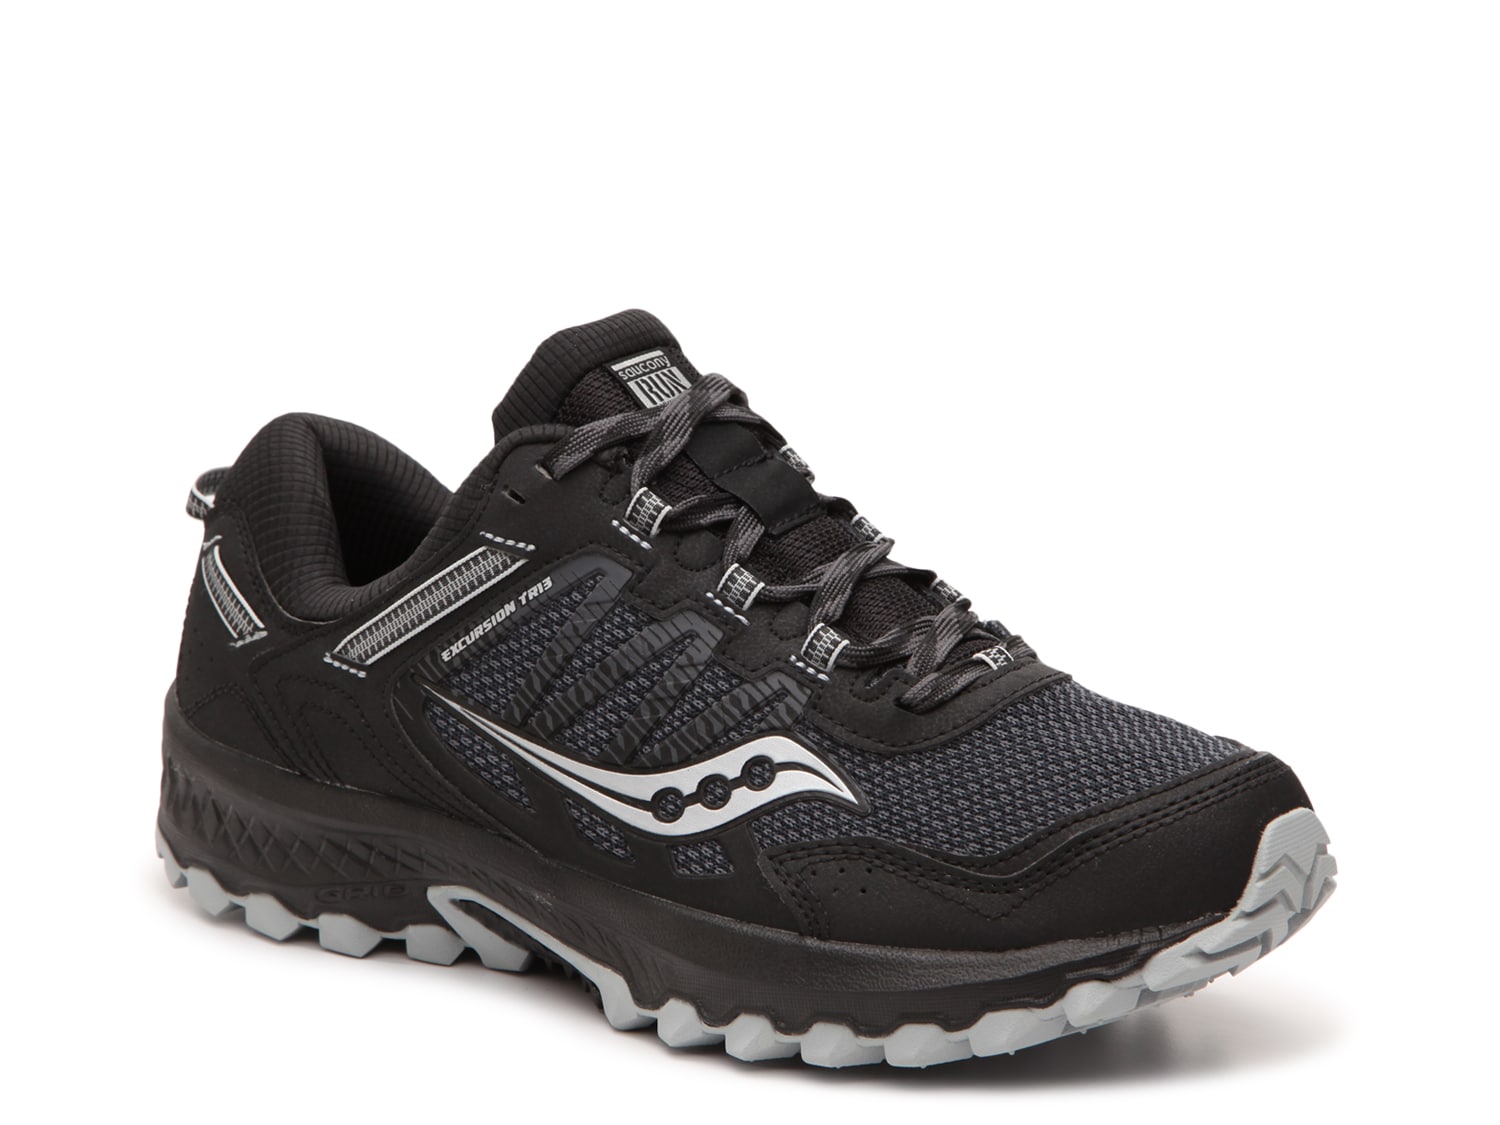 saucony kids excursion running shoes